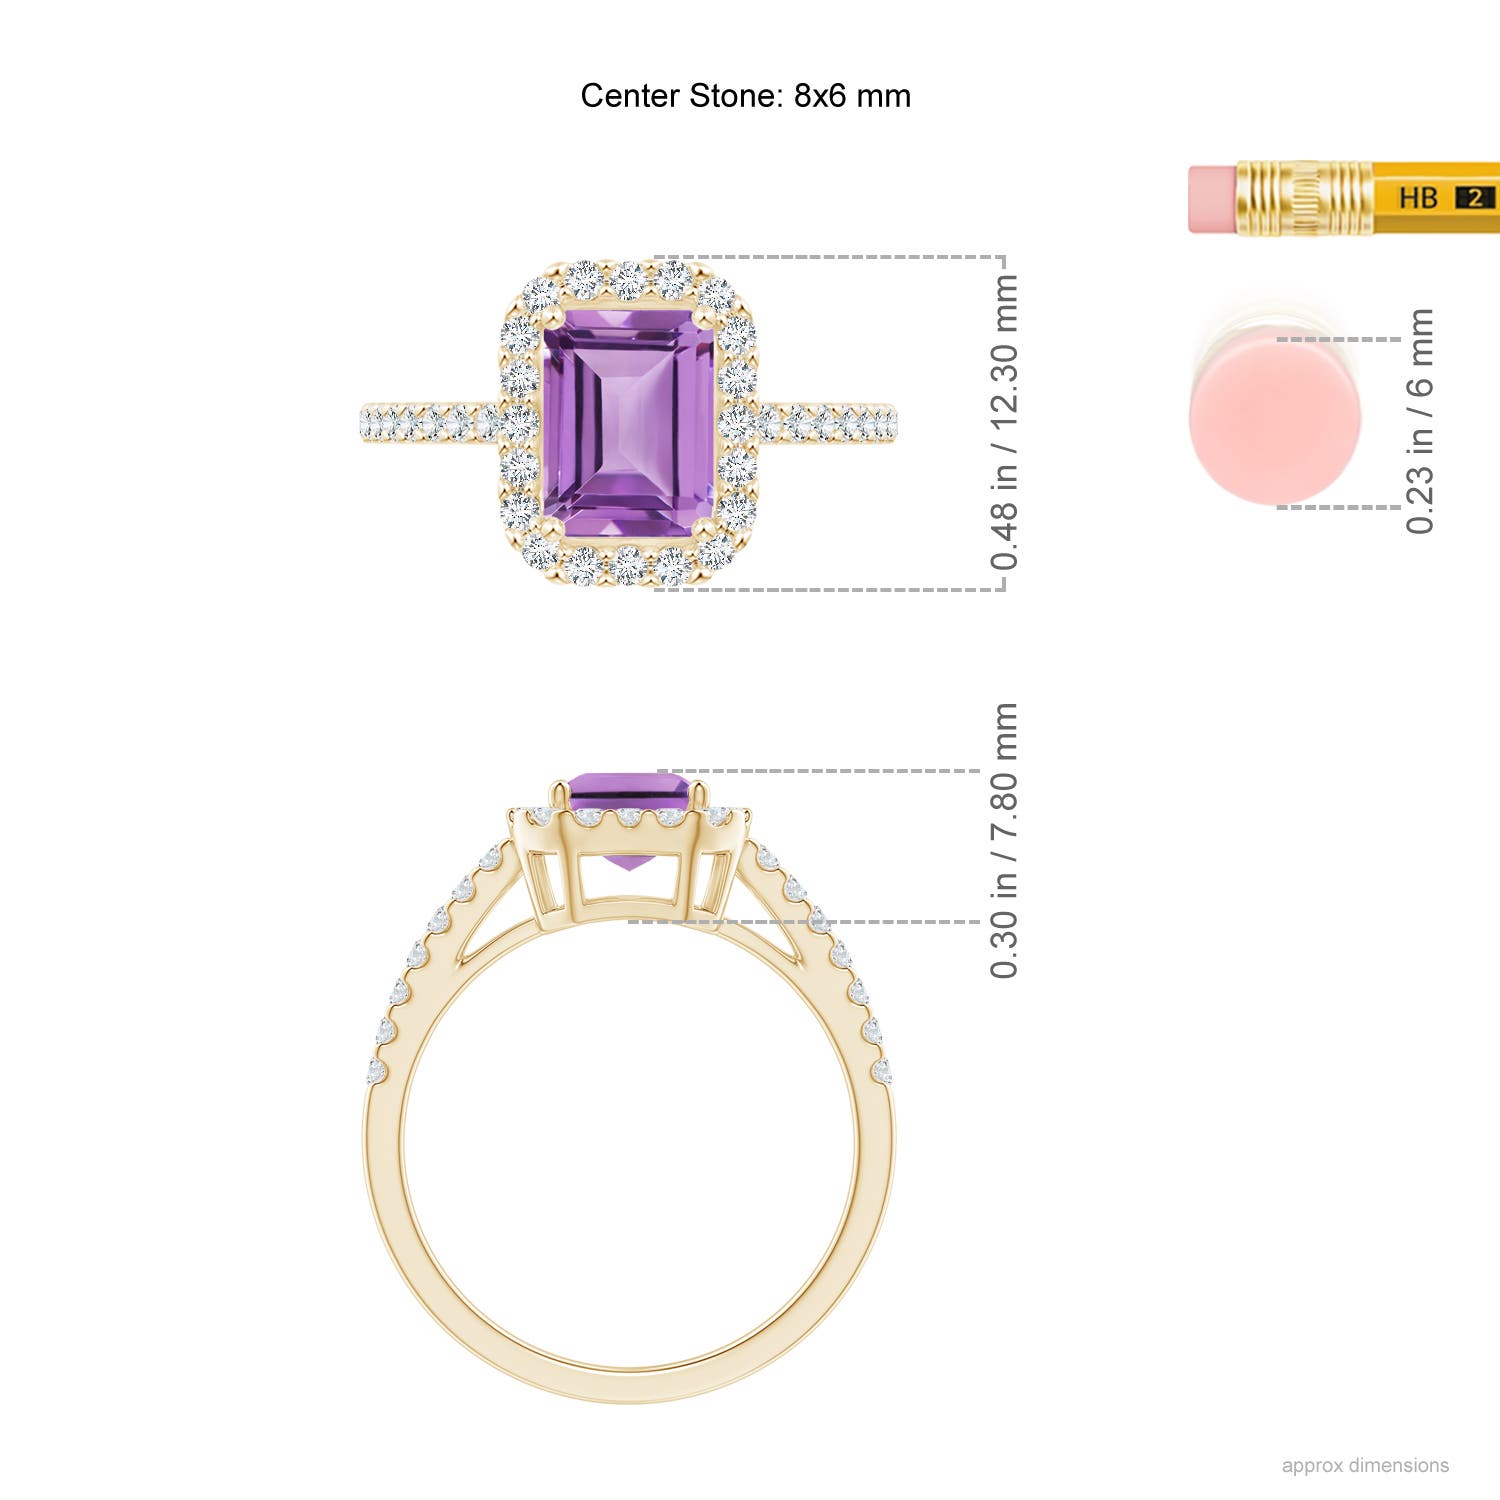 A - Amethyst / 1.91 CT / 14 KT Yellow Gold